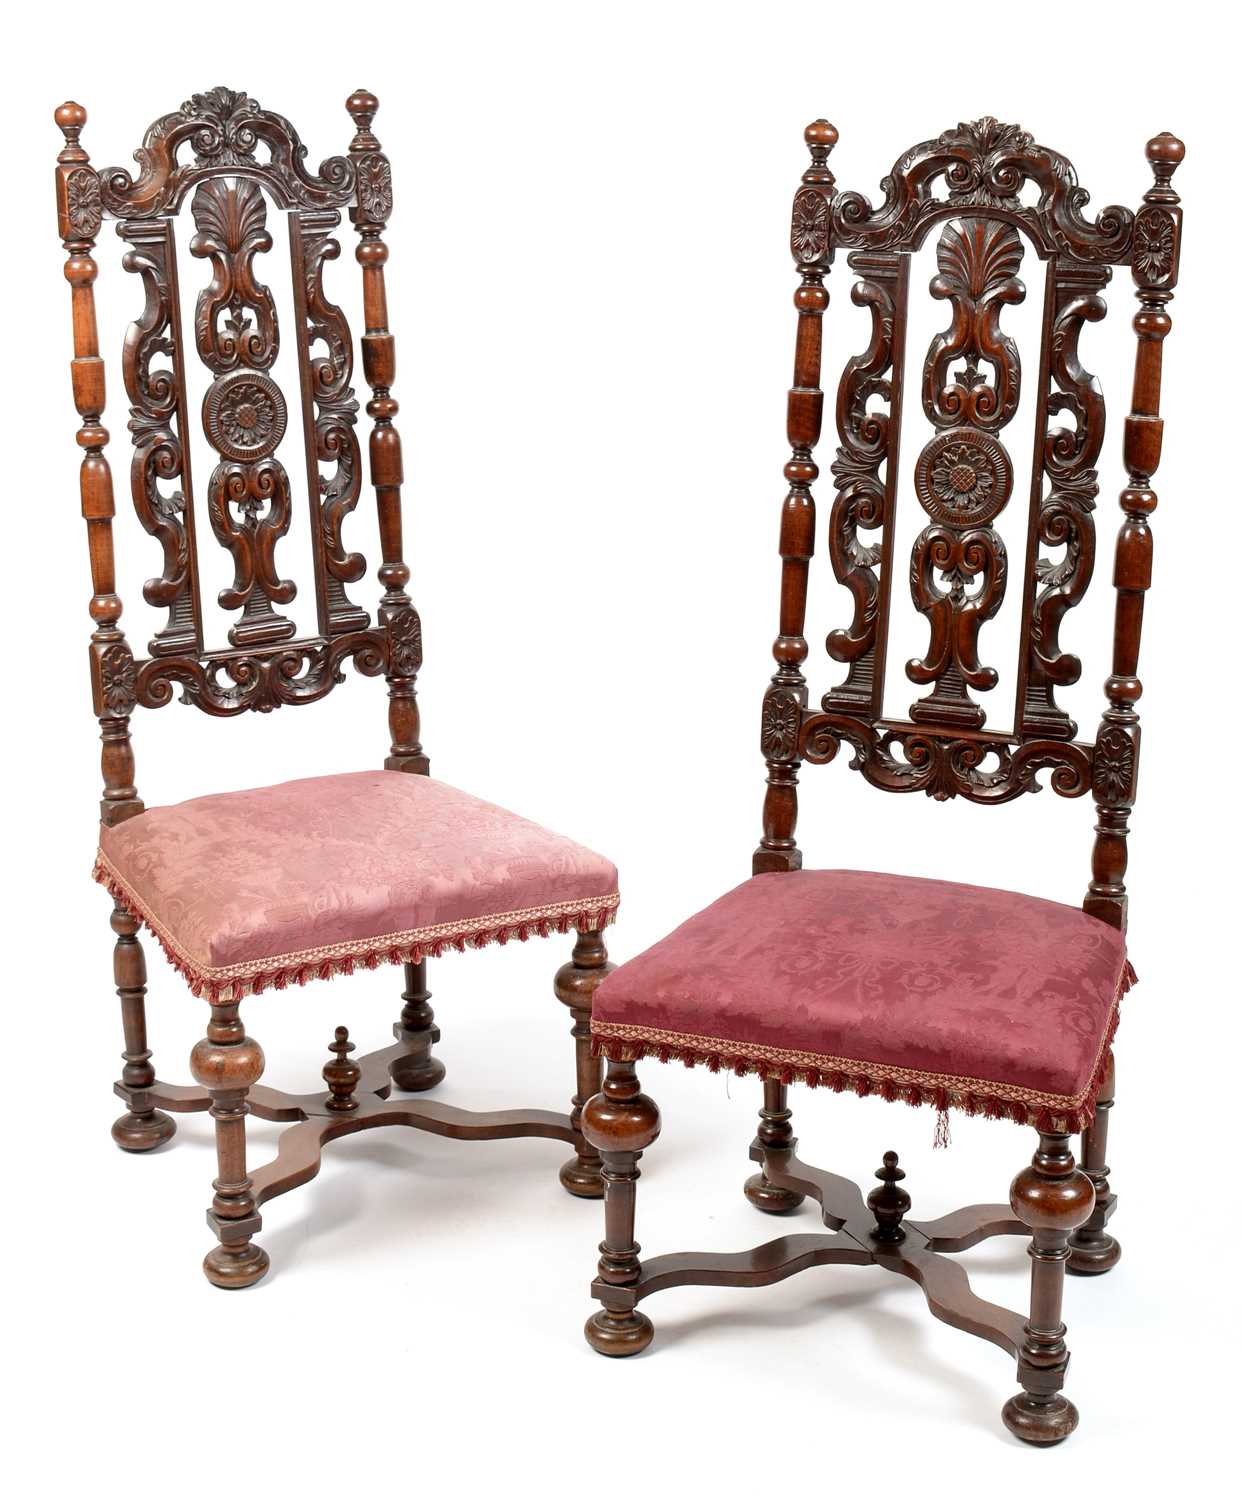 Lot 838 - Pair of Victorian high back chairs